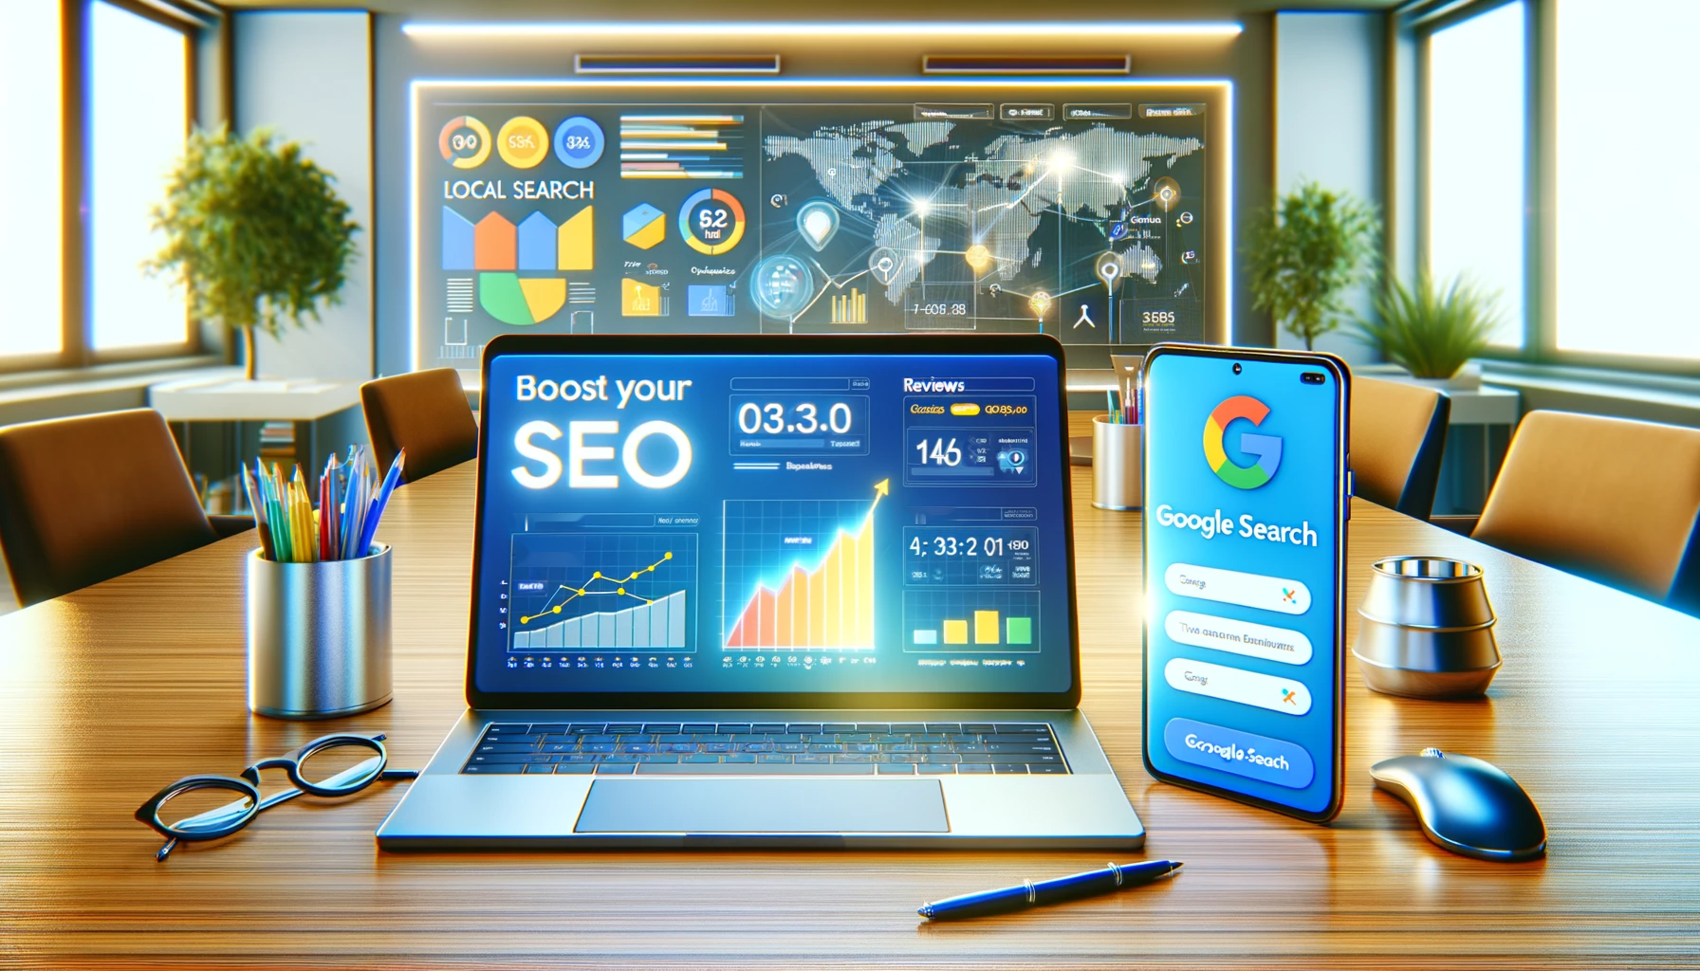 Drive Your Business Growth with Custom SEO Services from AutomationLinks